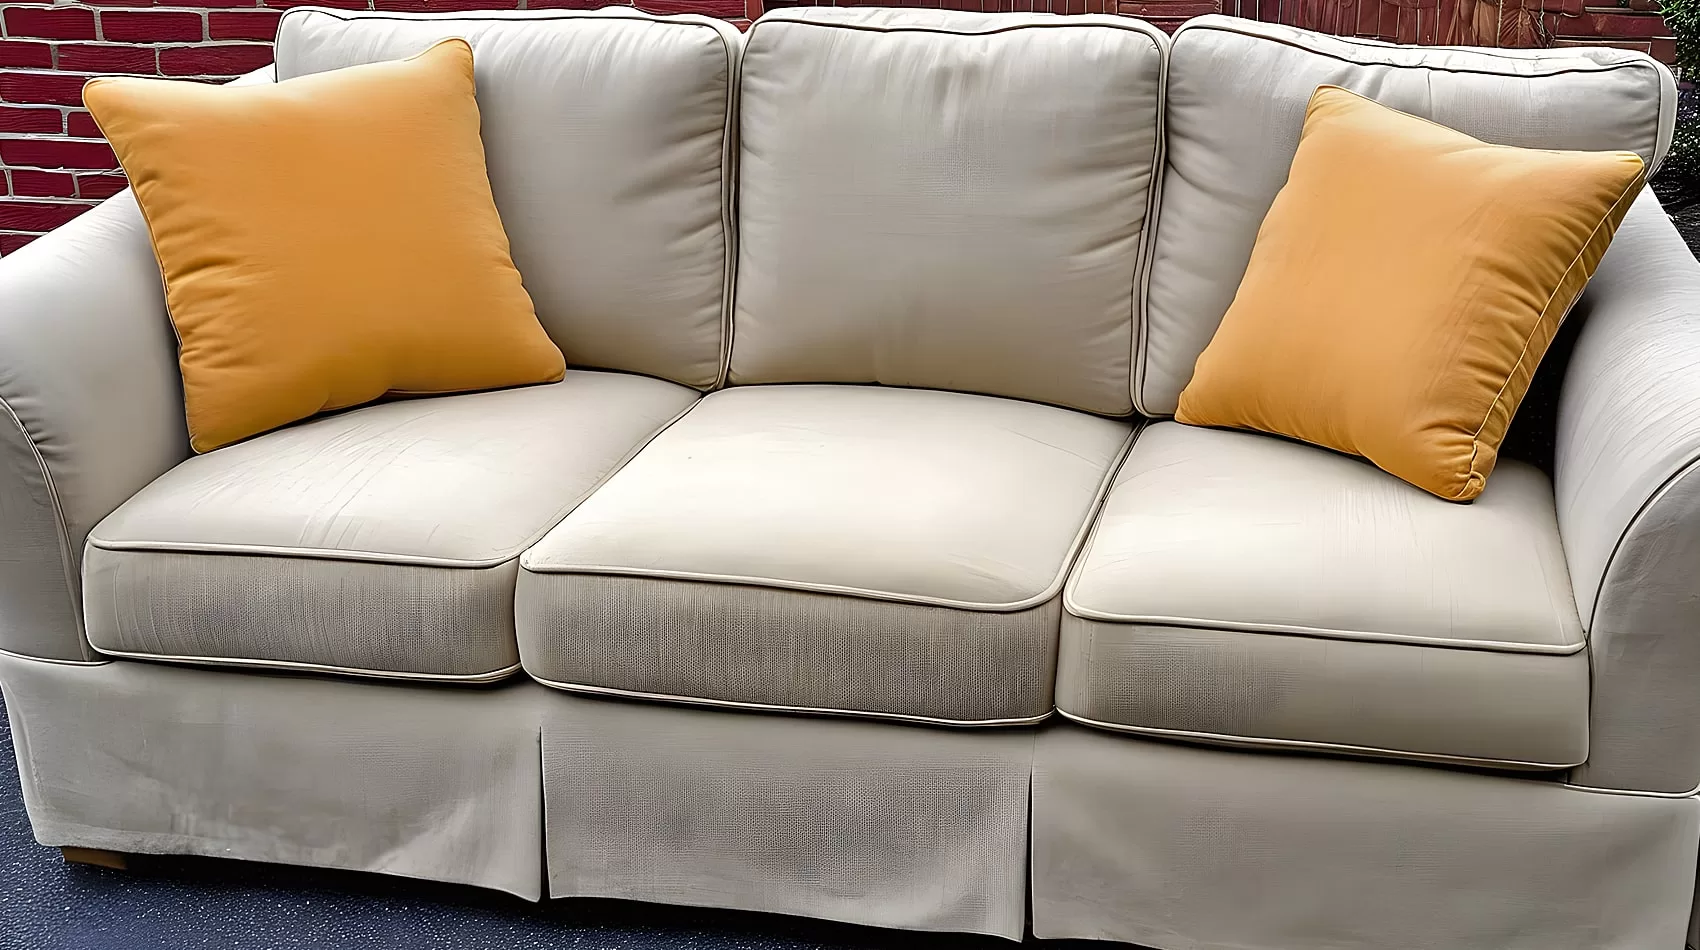 Slipcovers | Couch Cushion Slipcovers | Couch Cushion Slip Covers | Sofa Covers for 3 Cushion Couch